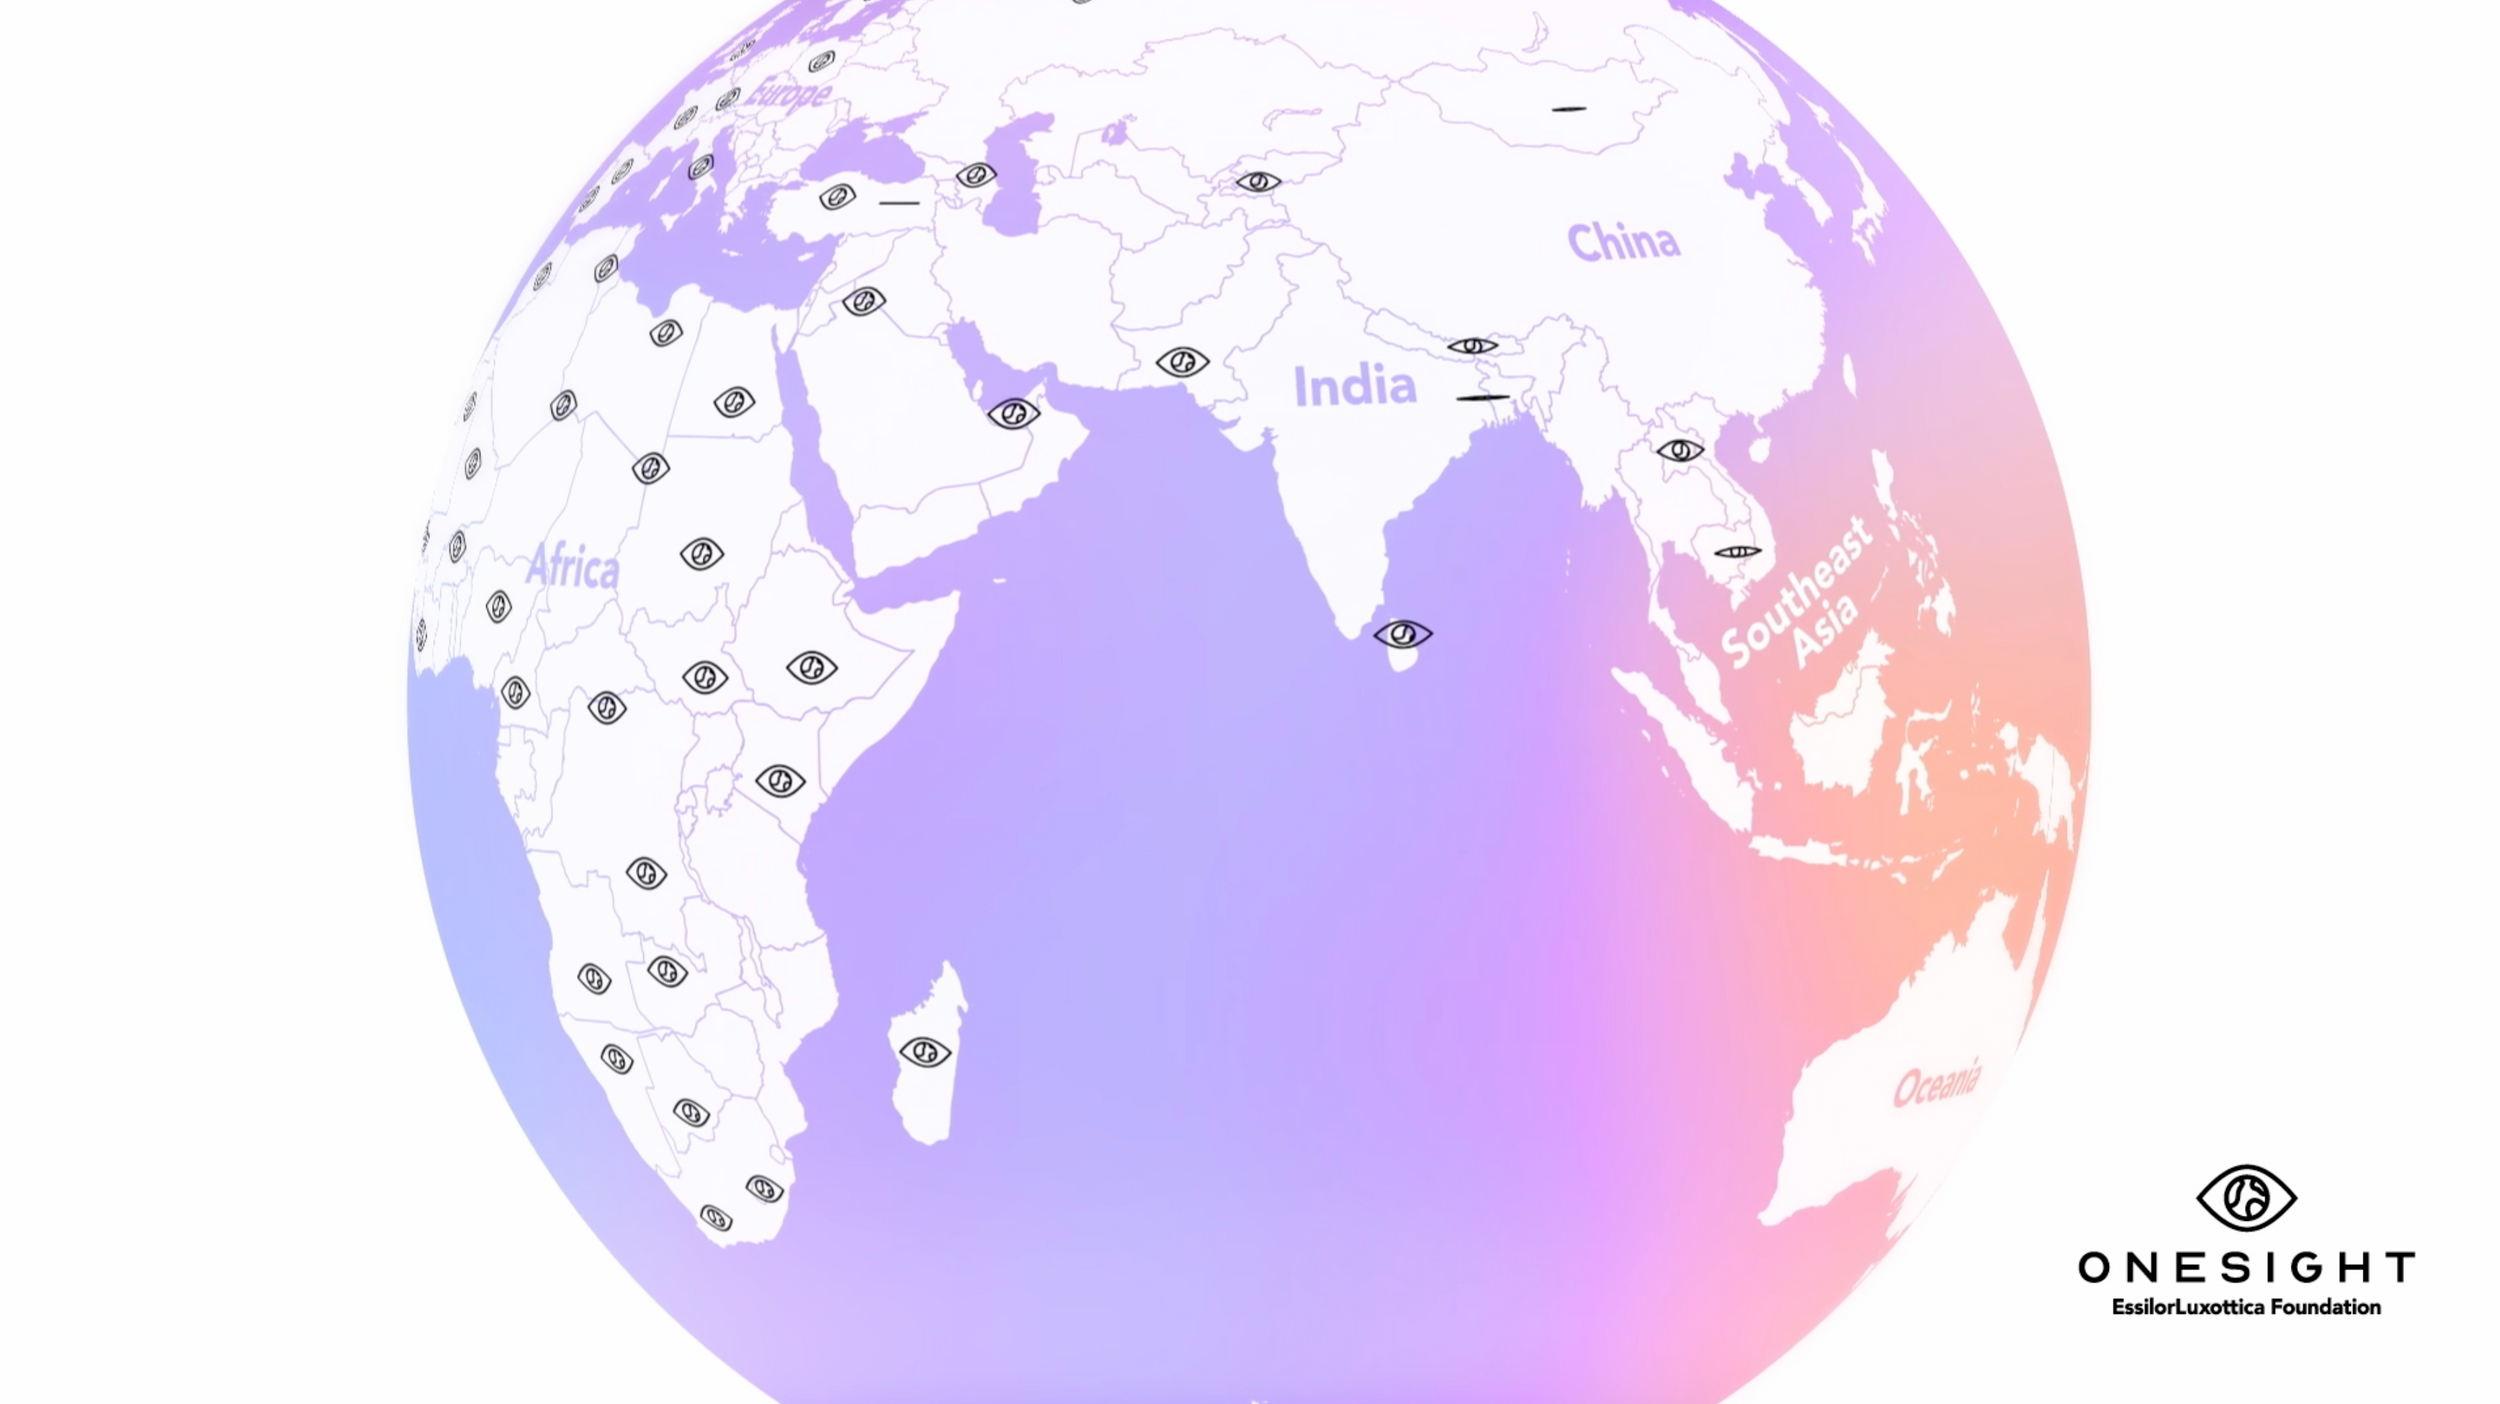 A globe with OneSight logos spread across different continents